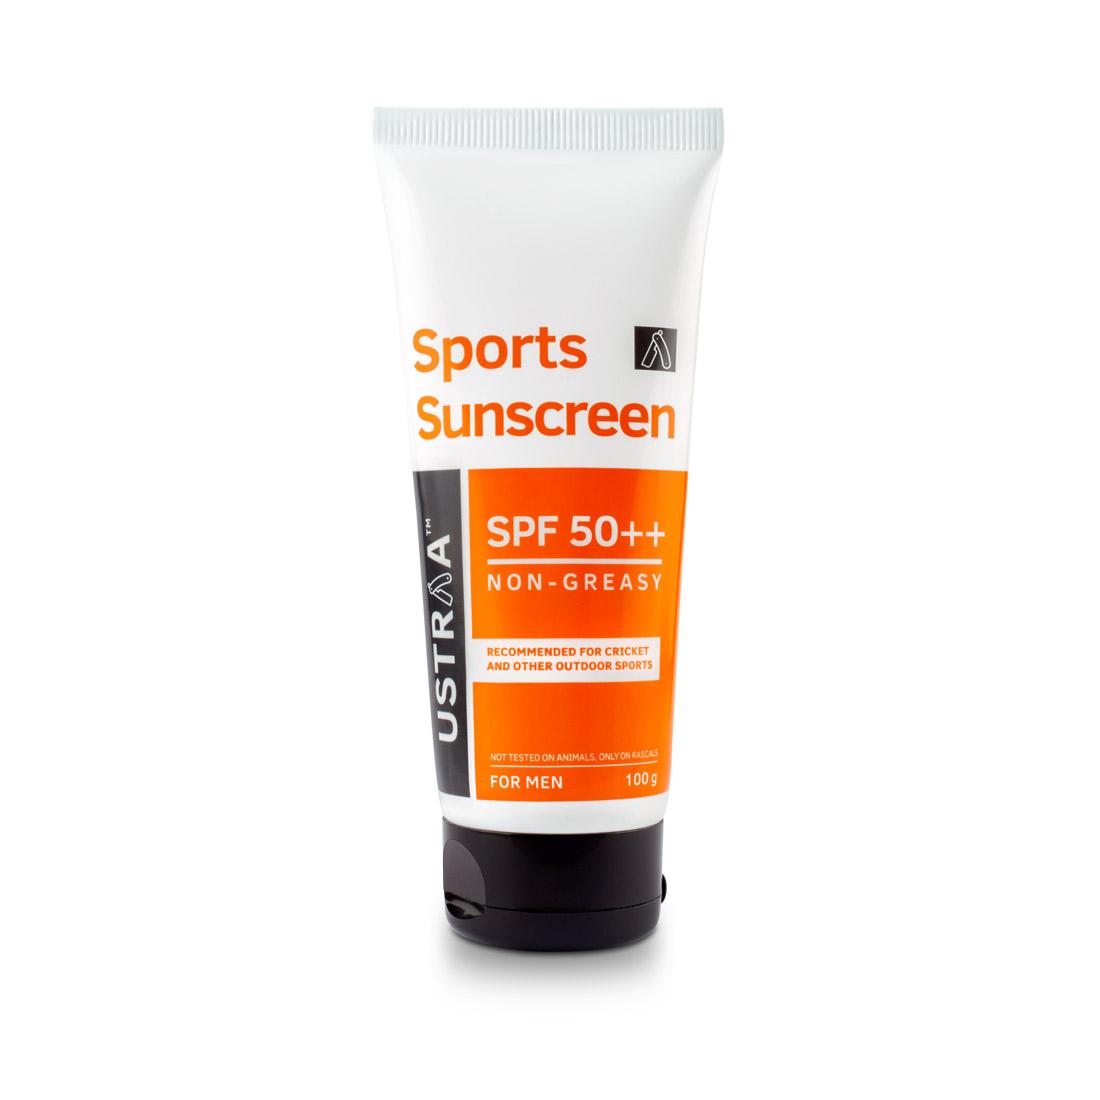 Ustraa Wash Proof Sports Sunscreen for Men SPF 50++ with Zinc to Prevent Tanning, 100g